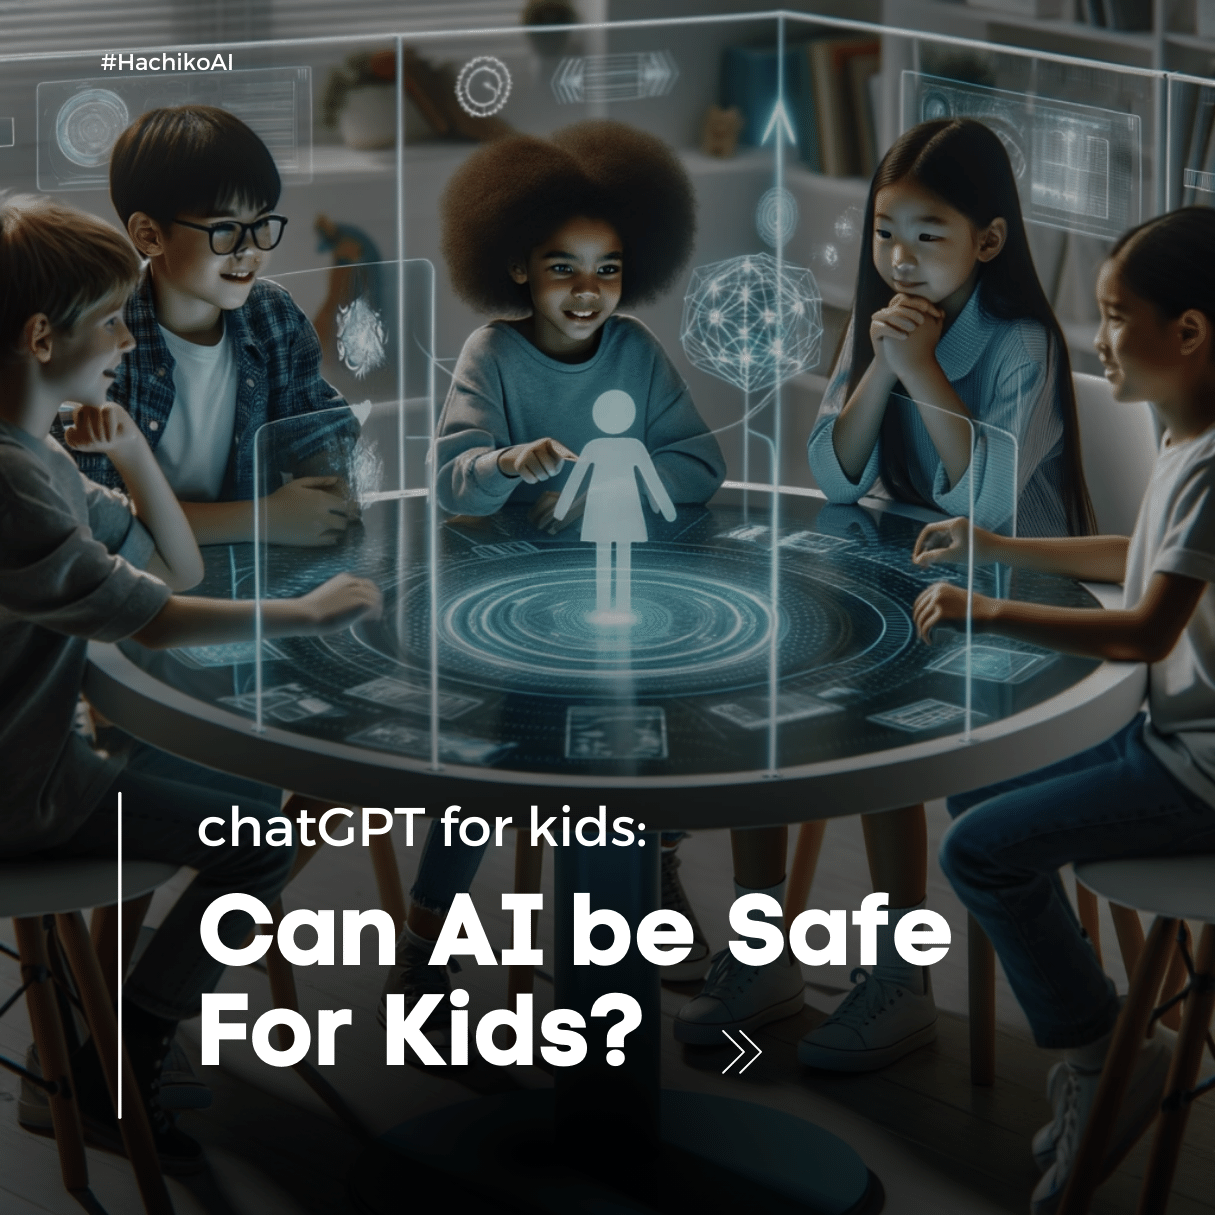 Can AI be safe for kids?